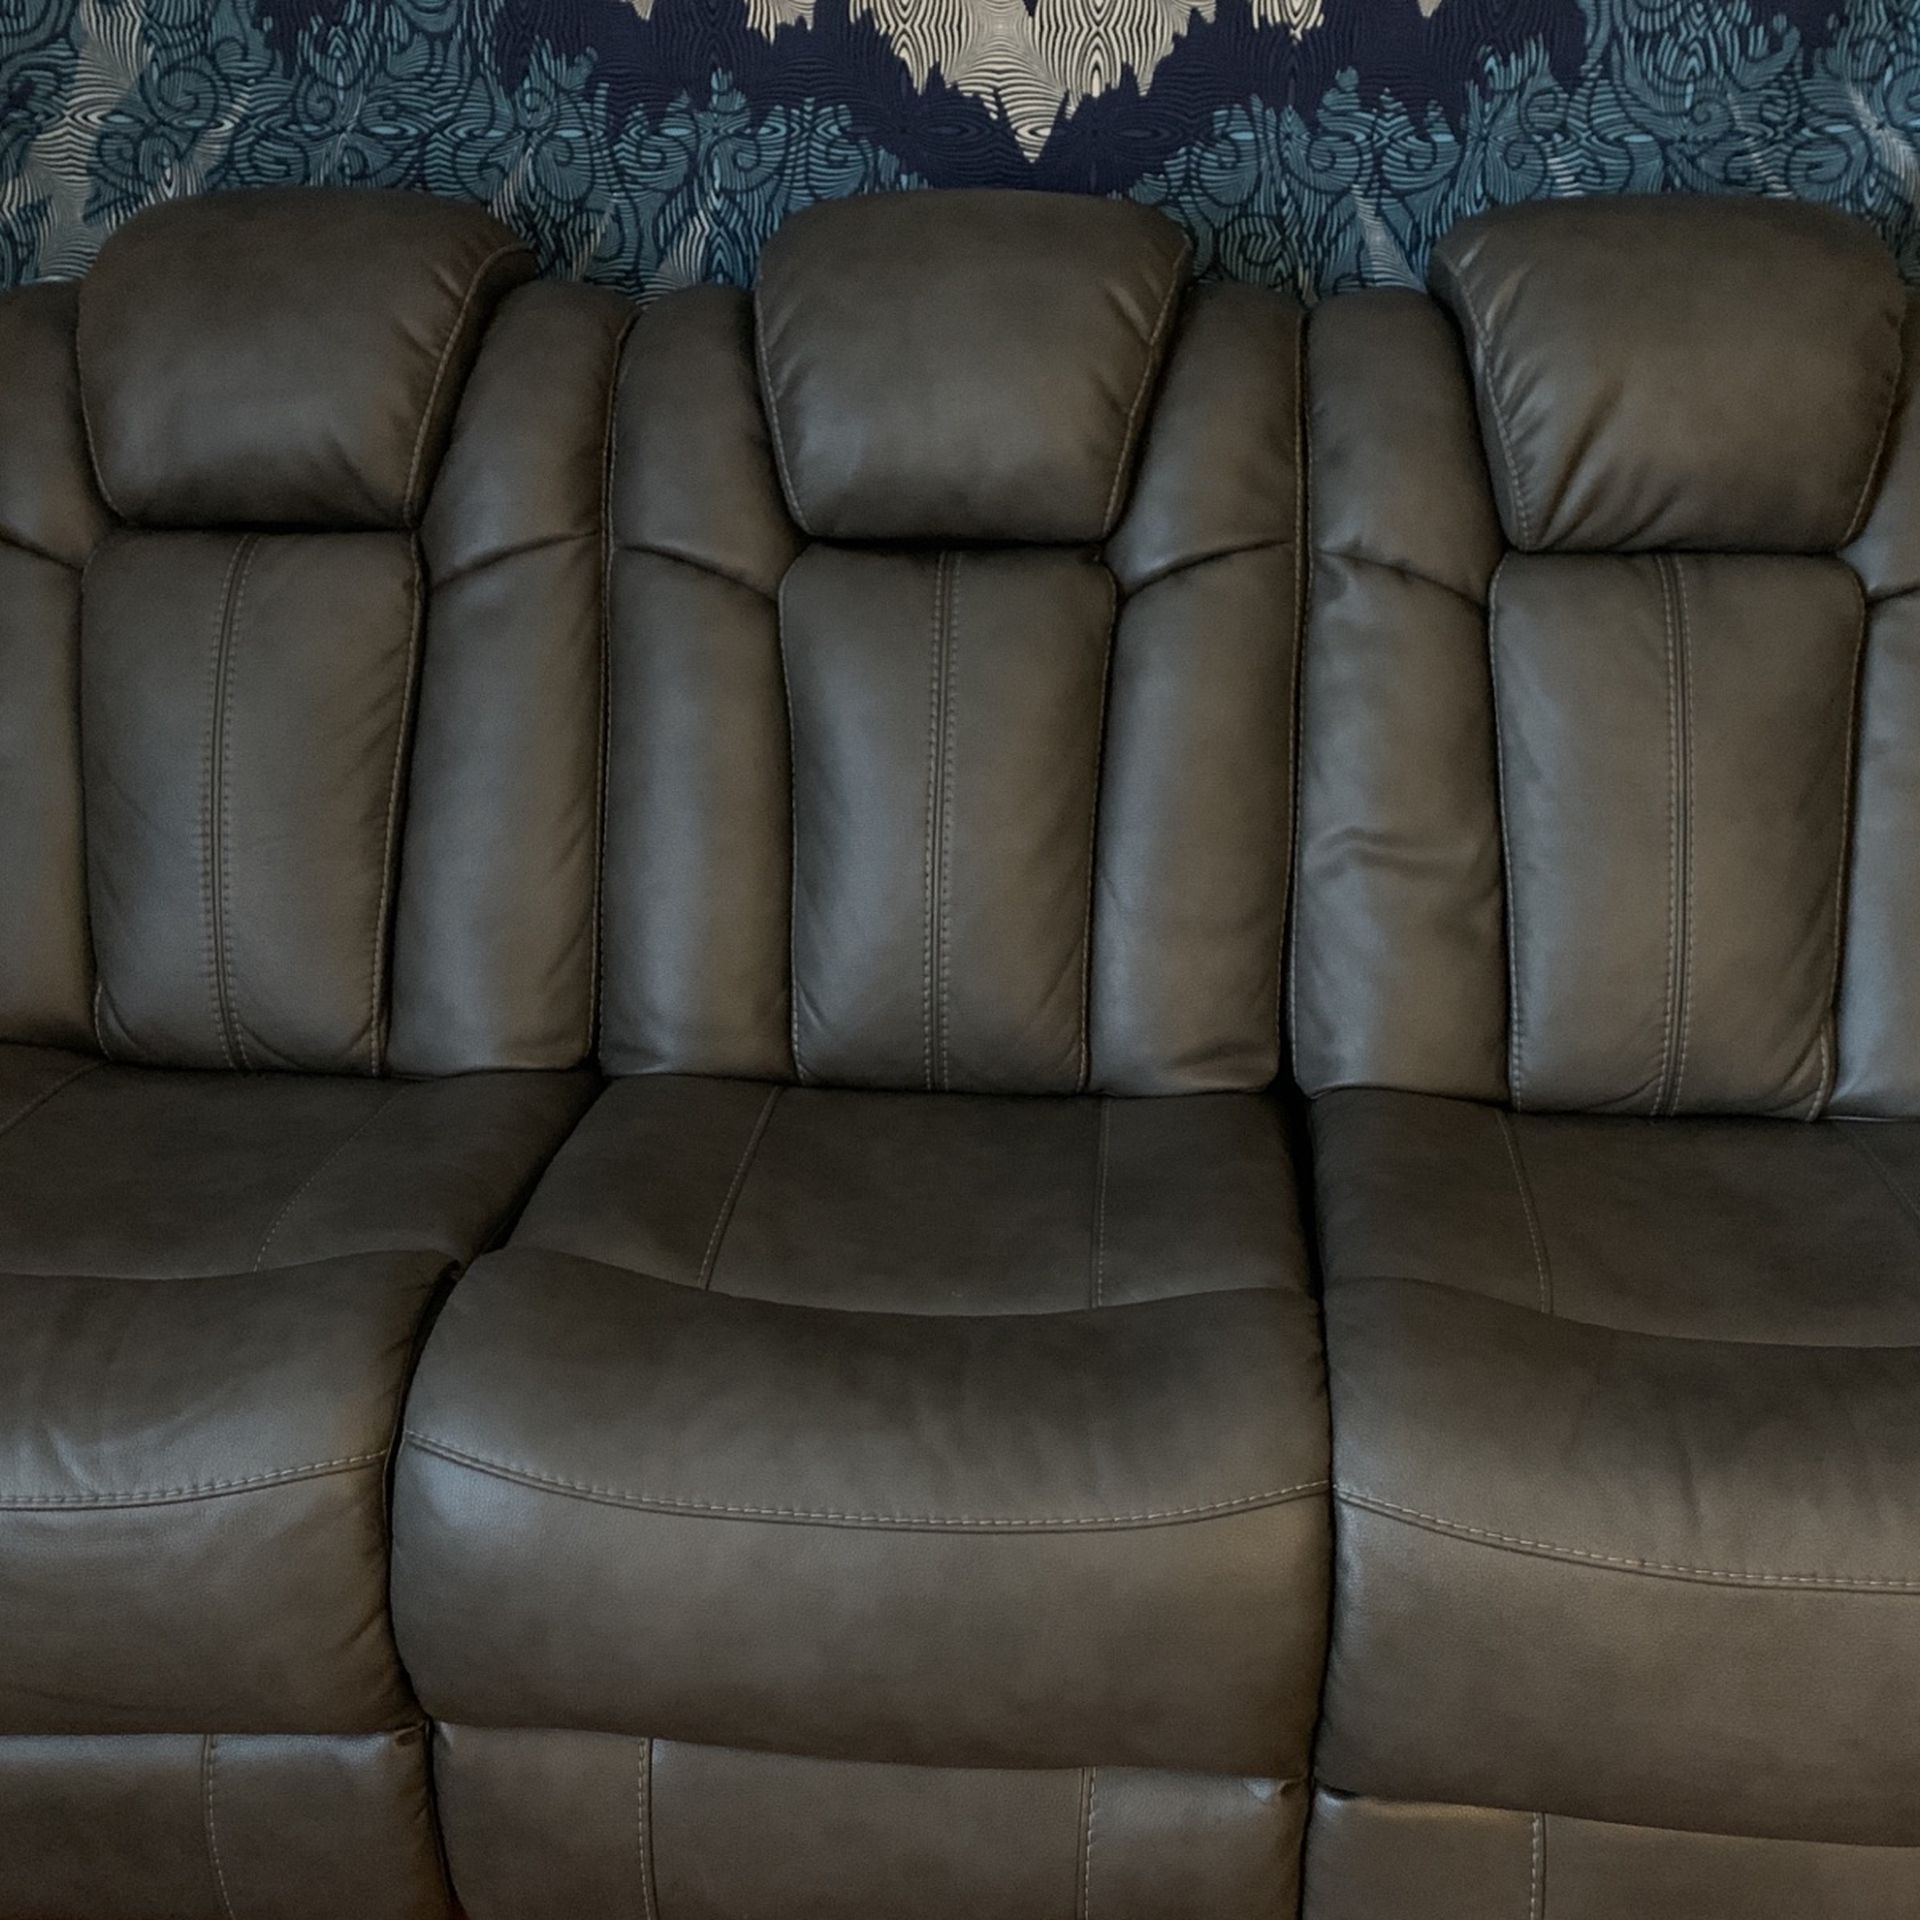 Leather Reclining Couch